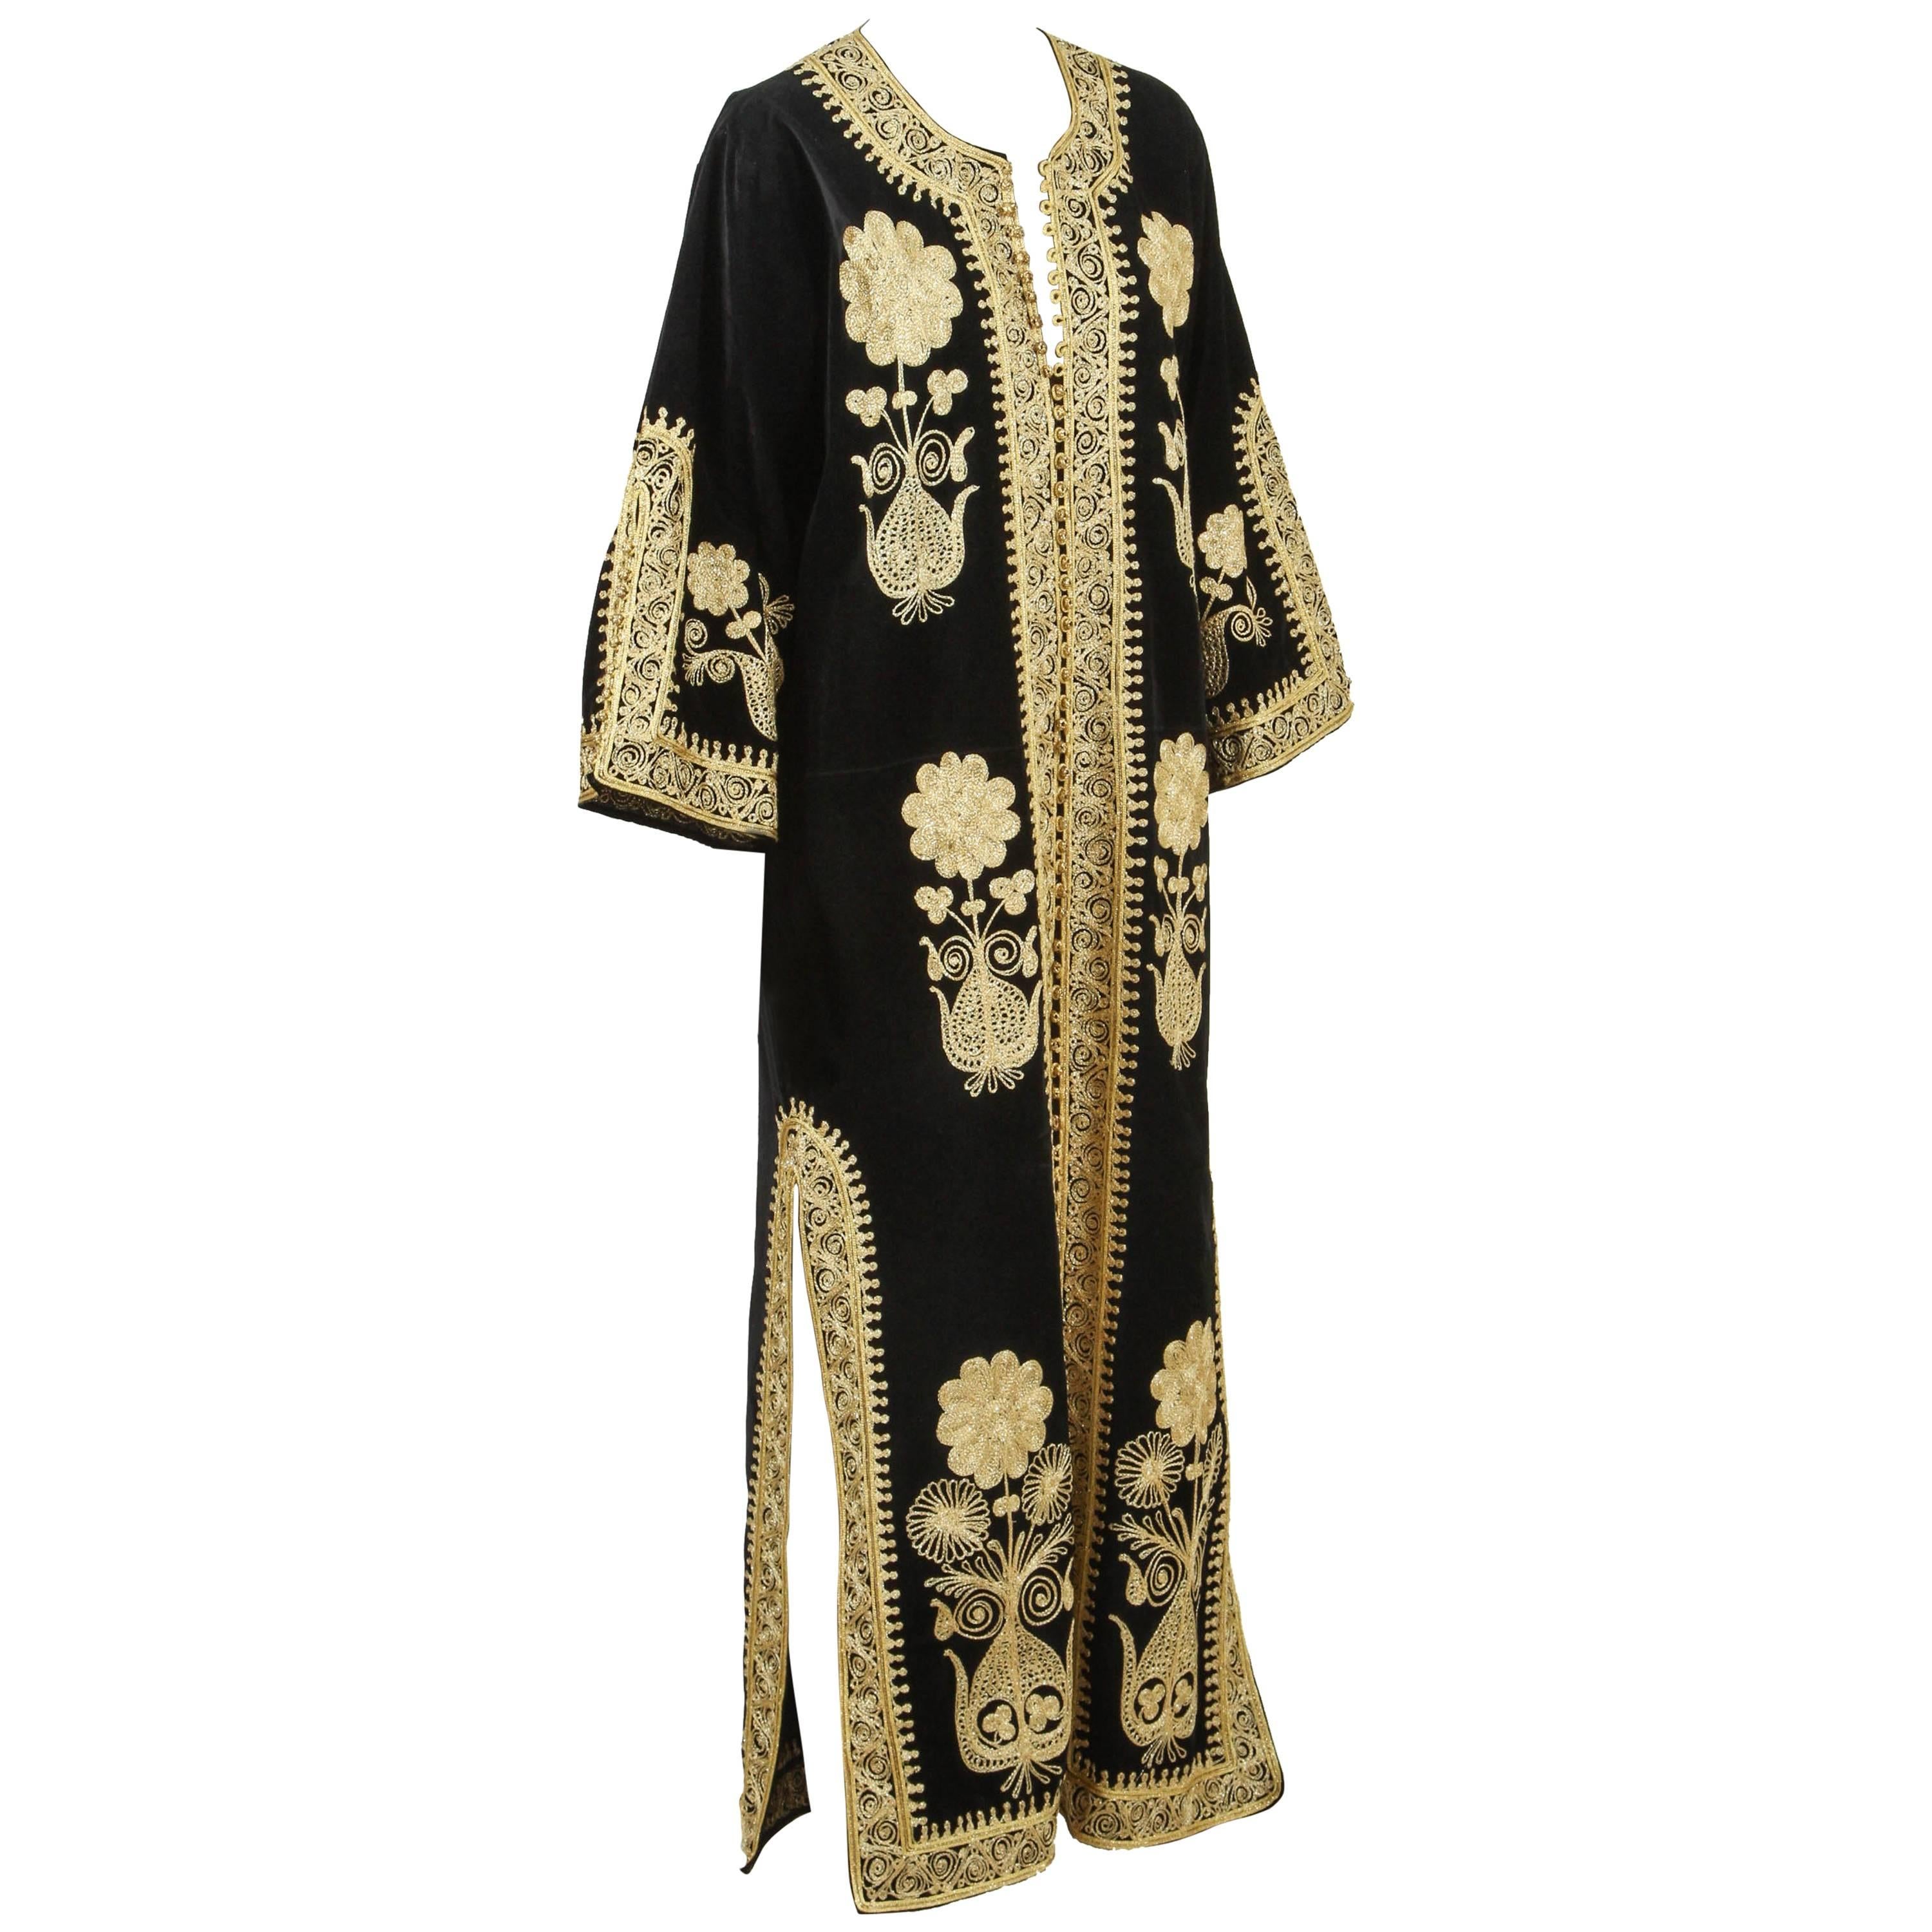 Moroccan Caftan, Black Kaftan Embroidered with Gold